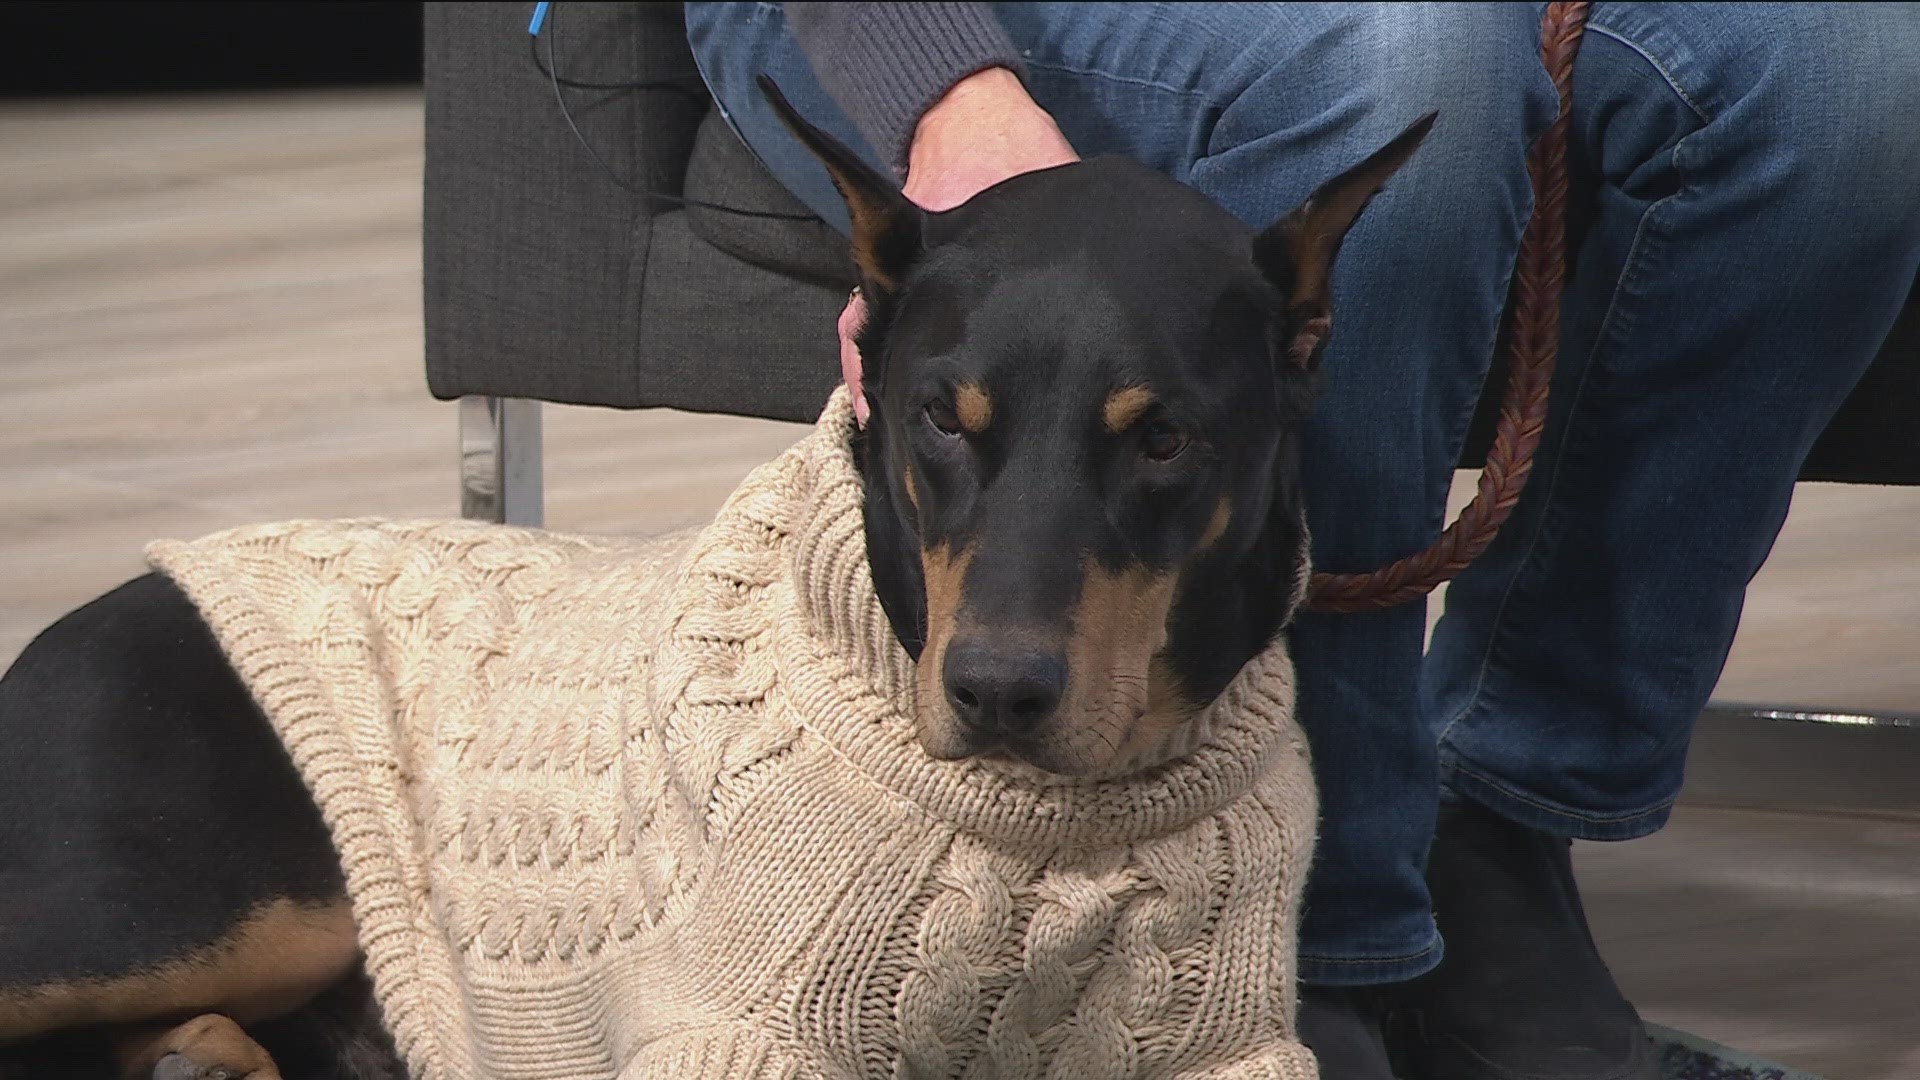 Kathryn Newman and "Higgins the Doberman" from Augusta Dog Training joined KARE 11 Saturday to demonstrate.